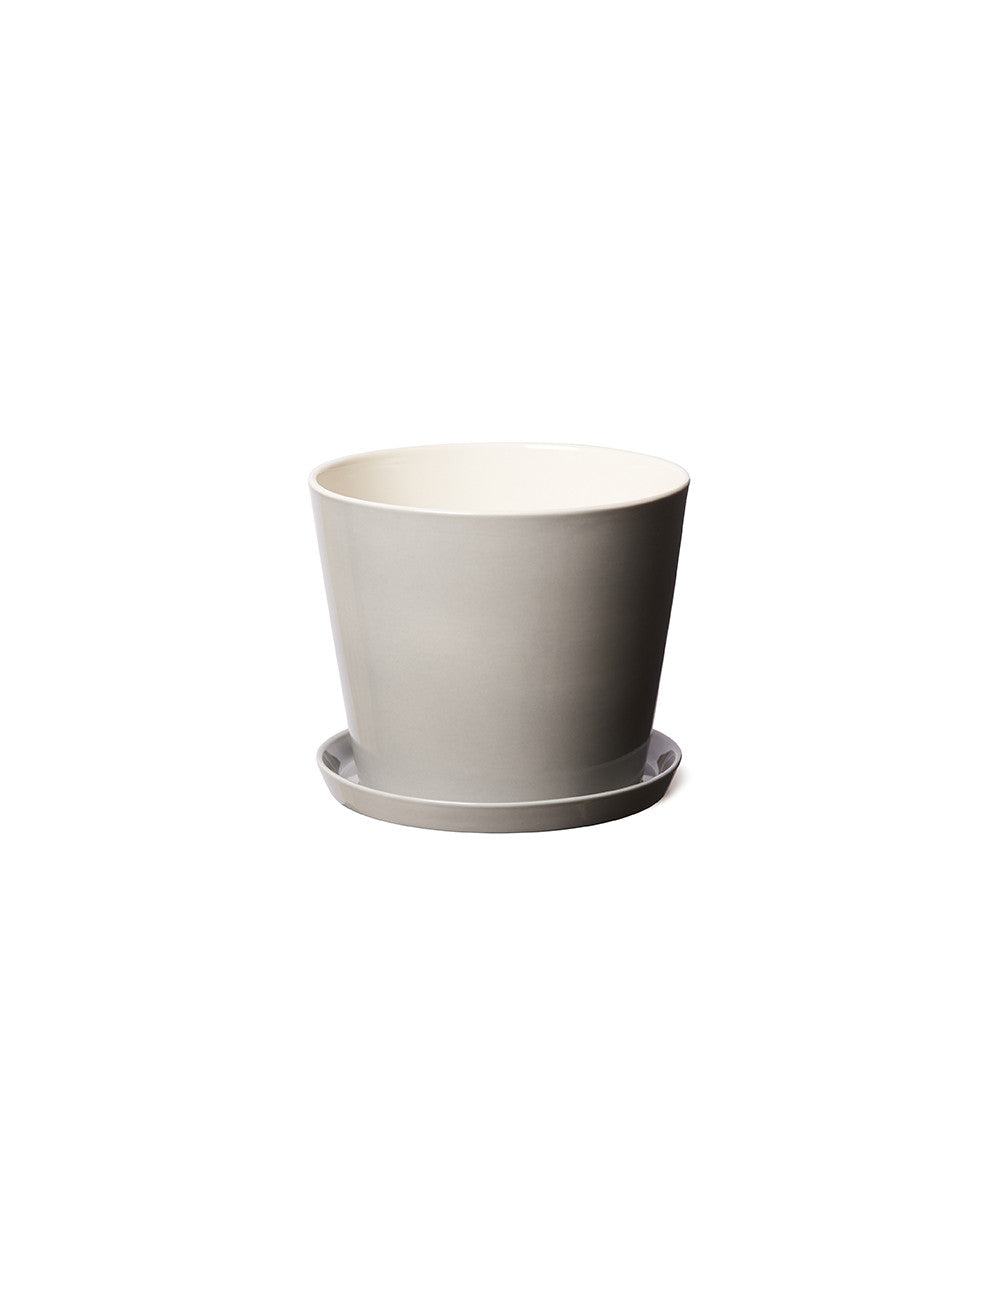 Flowerpot with saucer in concete grey